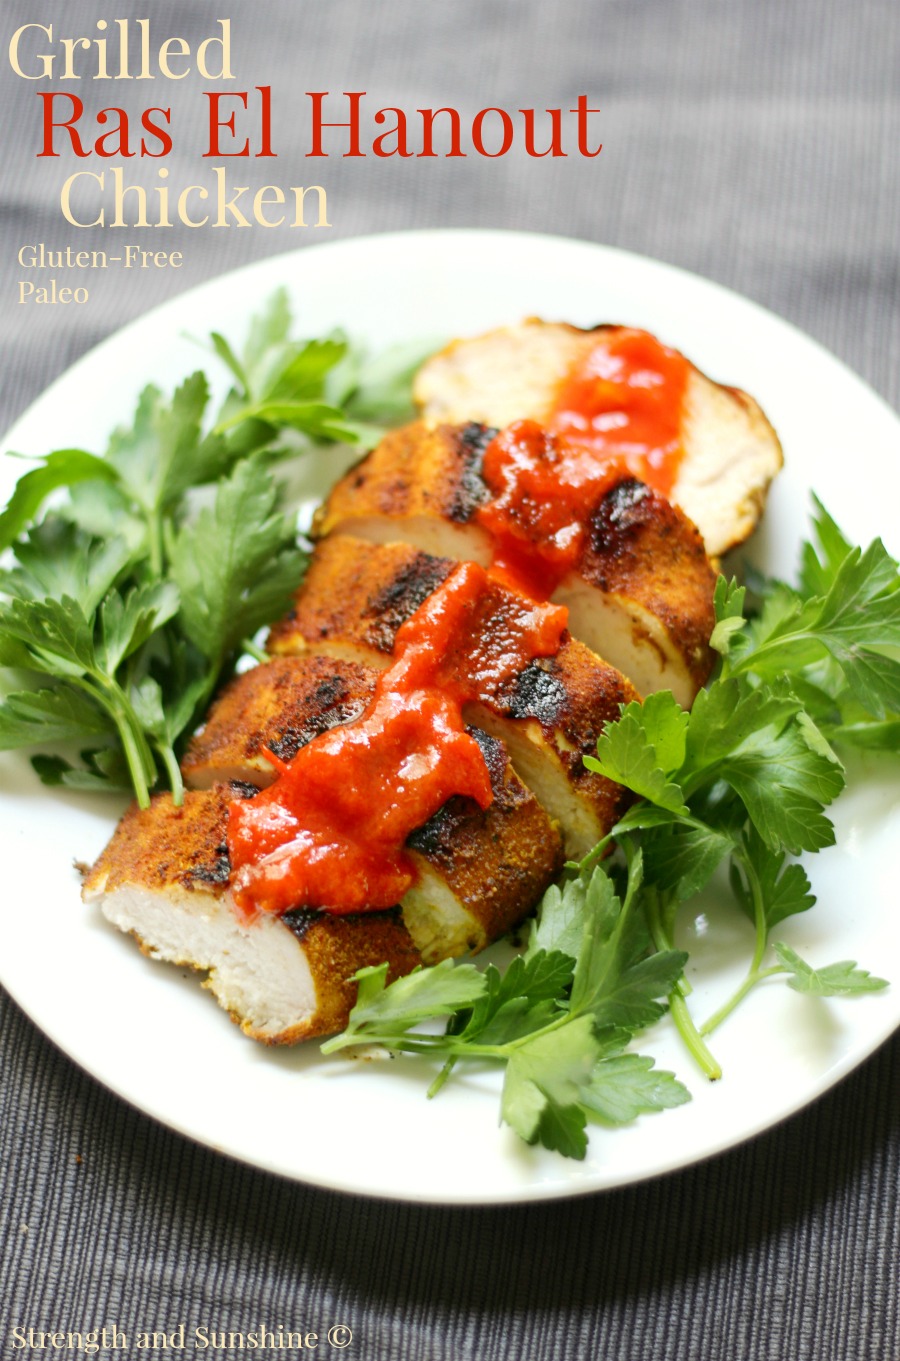 Grilled Ras El Hanout Chicken | Strength and Sunshine @RebeccaGF666 With an essential Moroccan spice blend, Grilled Ras El Hanout Chicken will become a new favorite healthy dinner recipe to throw on the grill. Gluten-free, paleo, and Whole 30 approved, entice the senses of smell and taste with this exotic dish.